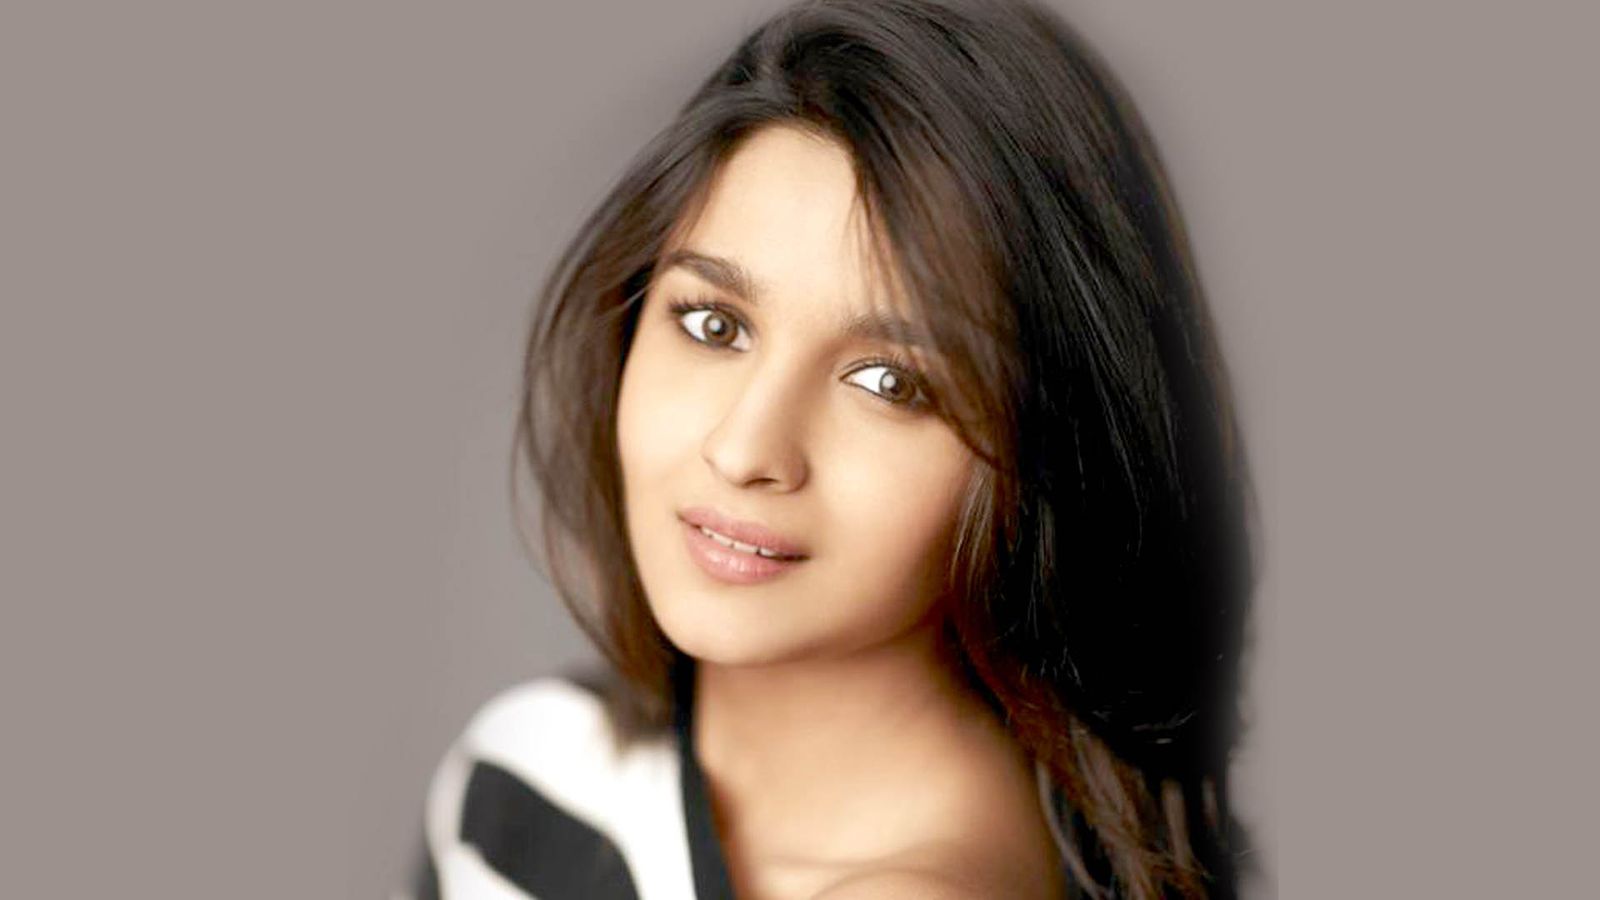 Alia Bhatt aims to become a singer, if fails as an actress